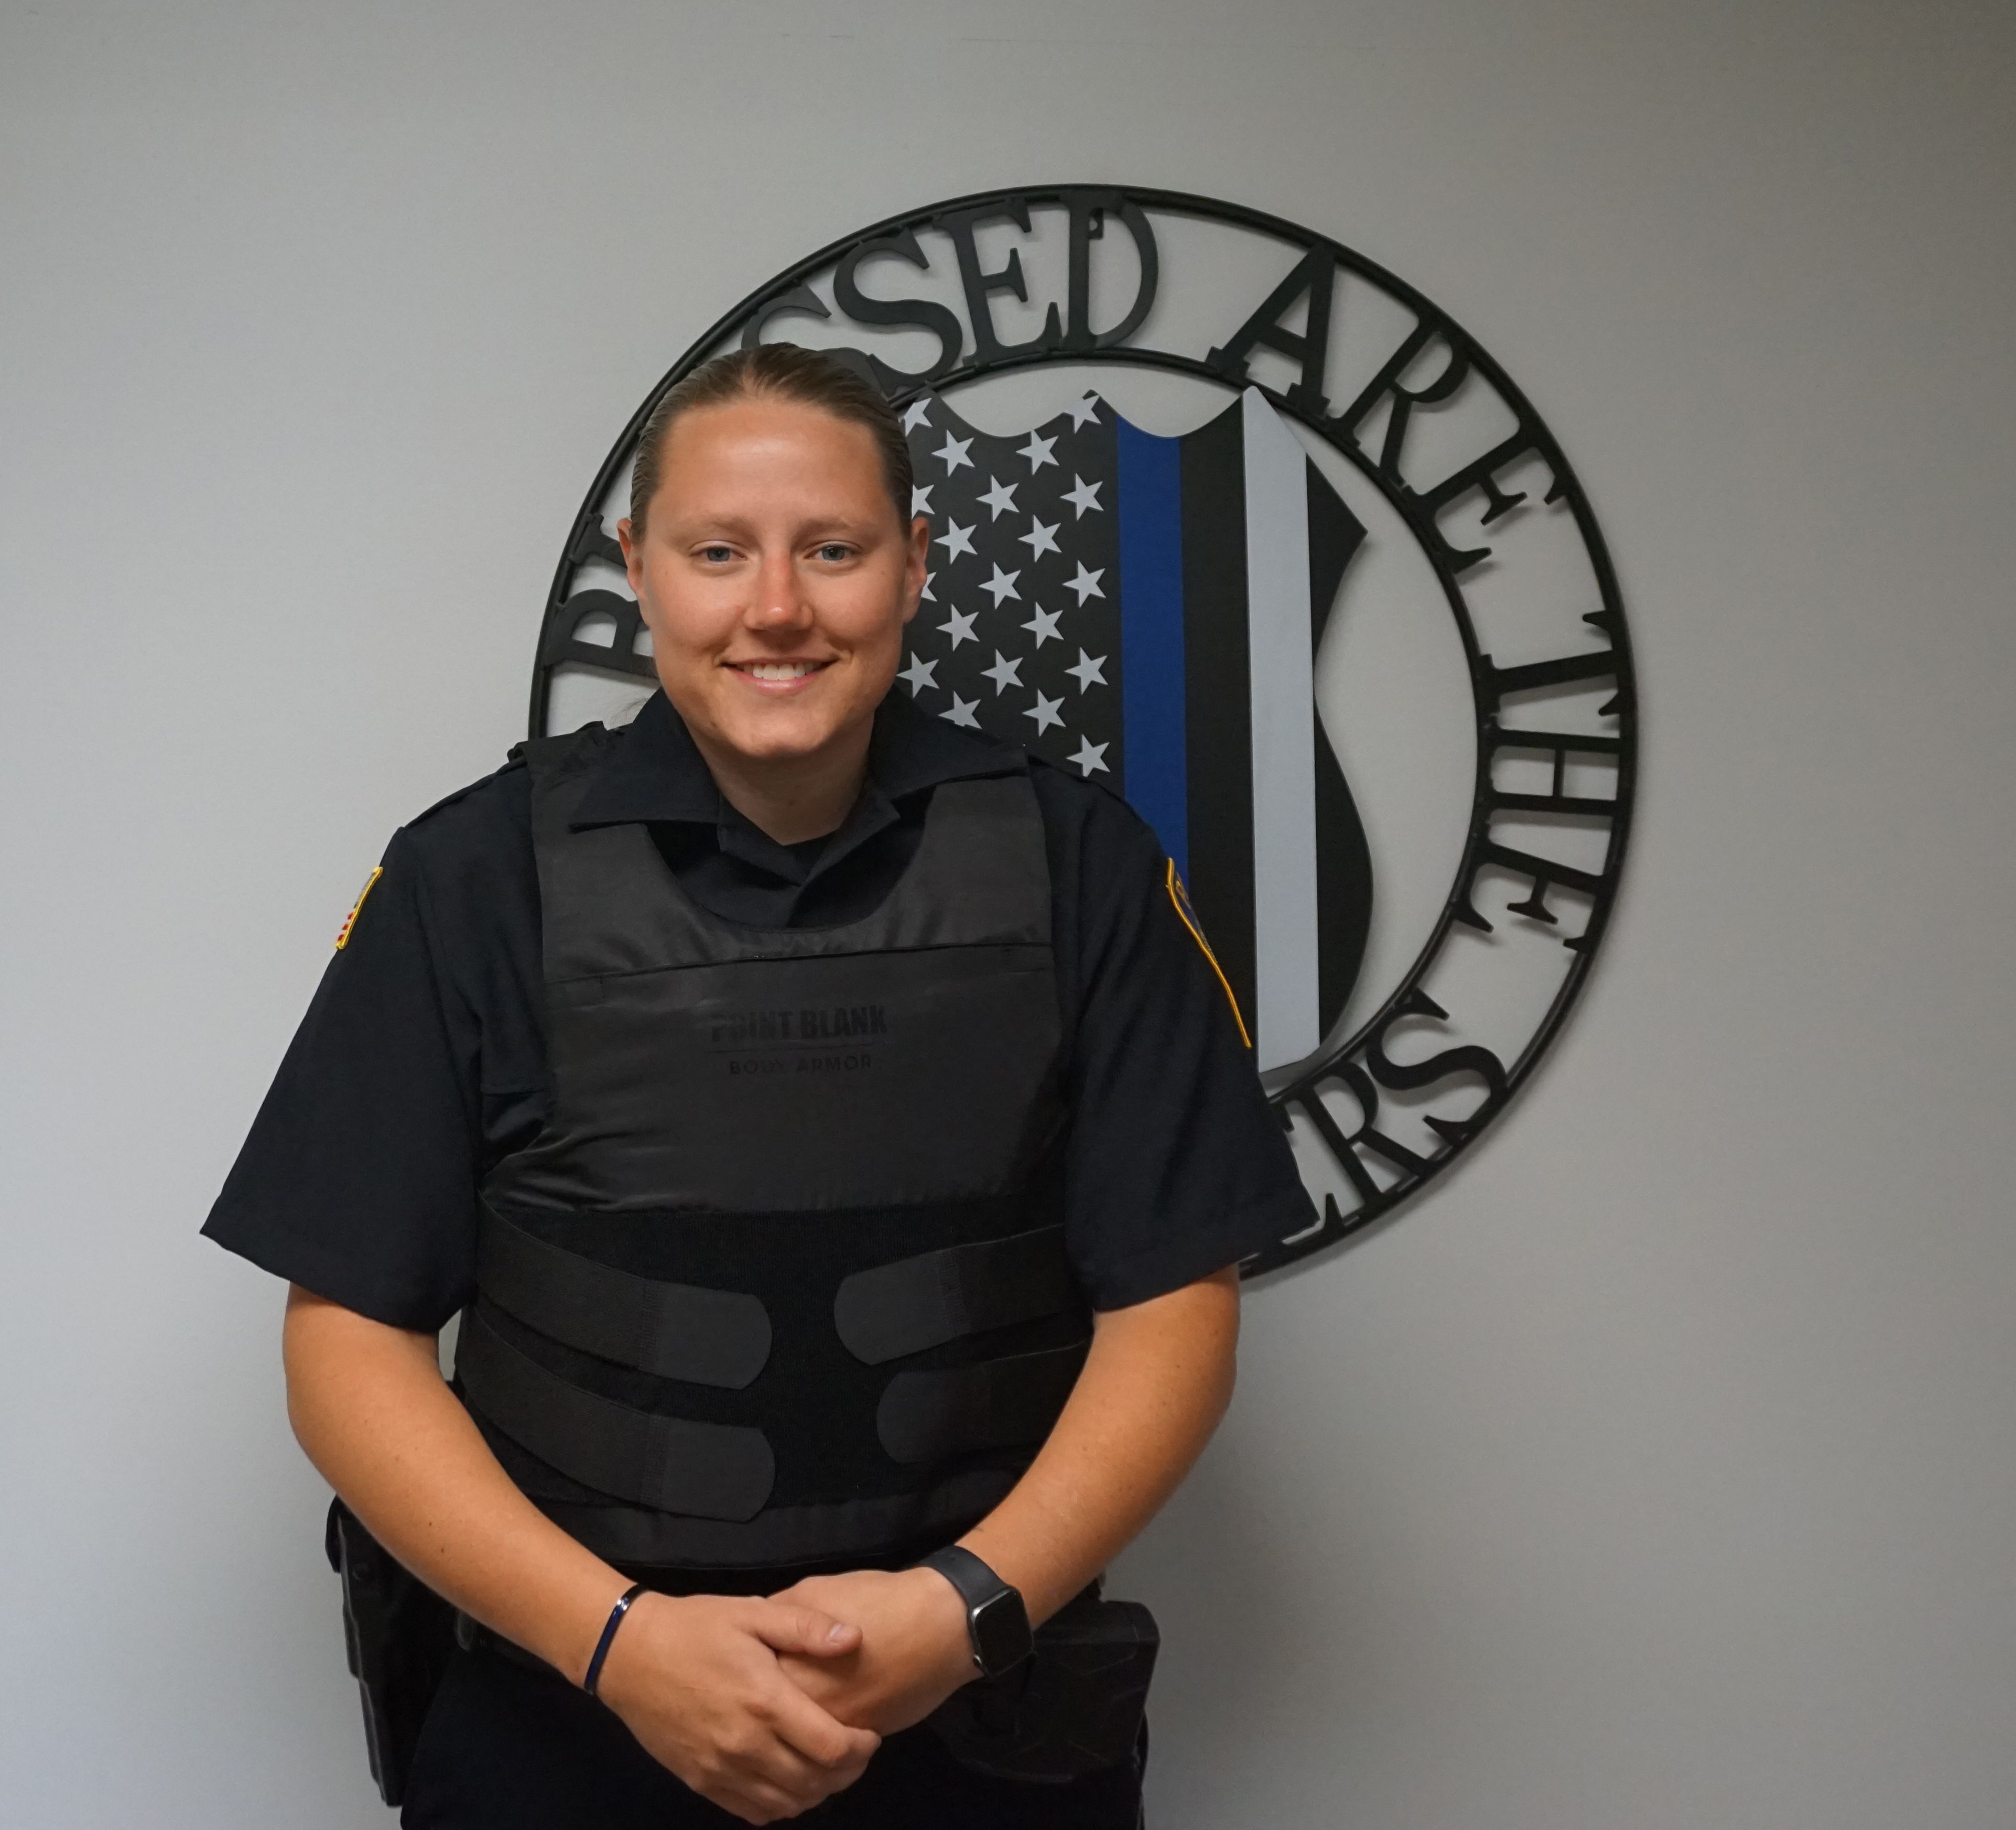 North Platte PD gets grant for body armor